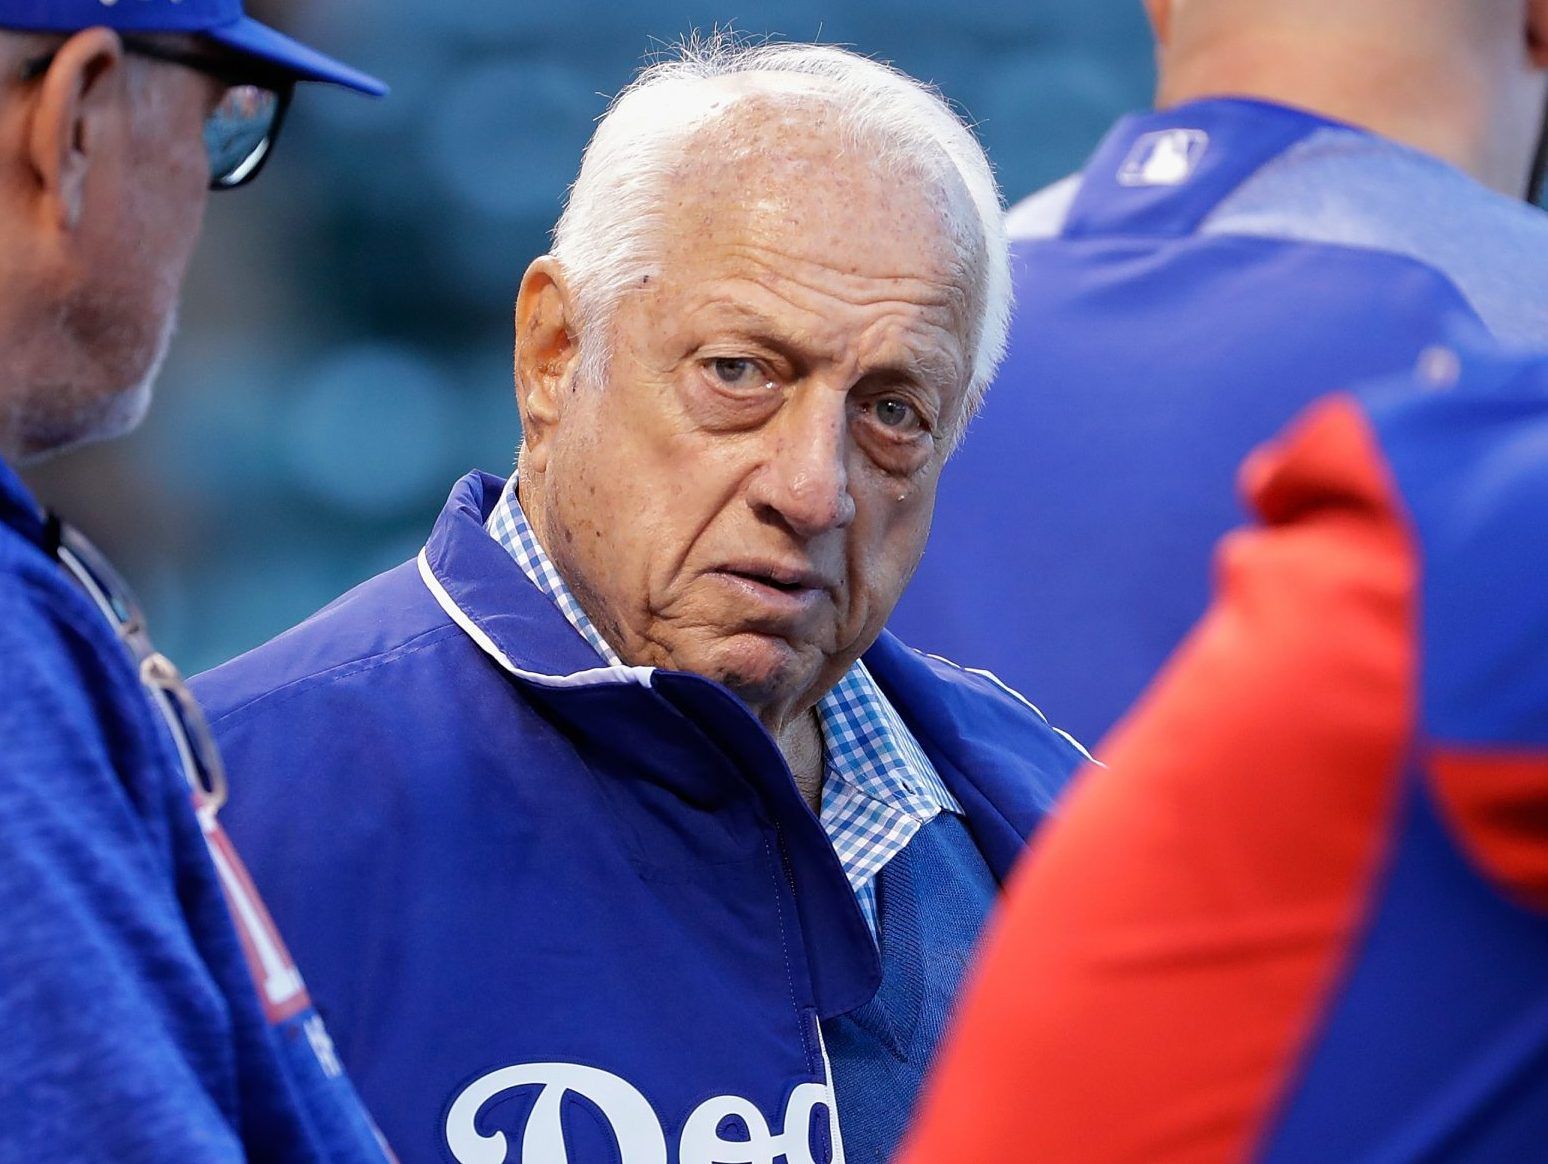 Legendary Dodgers manager Tommy Lasorda dies at 93